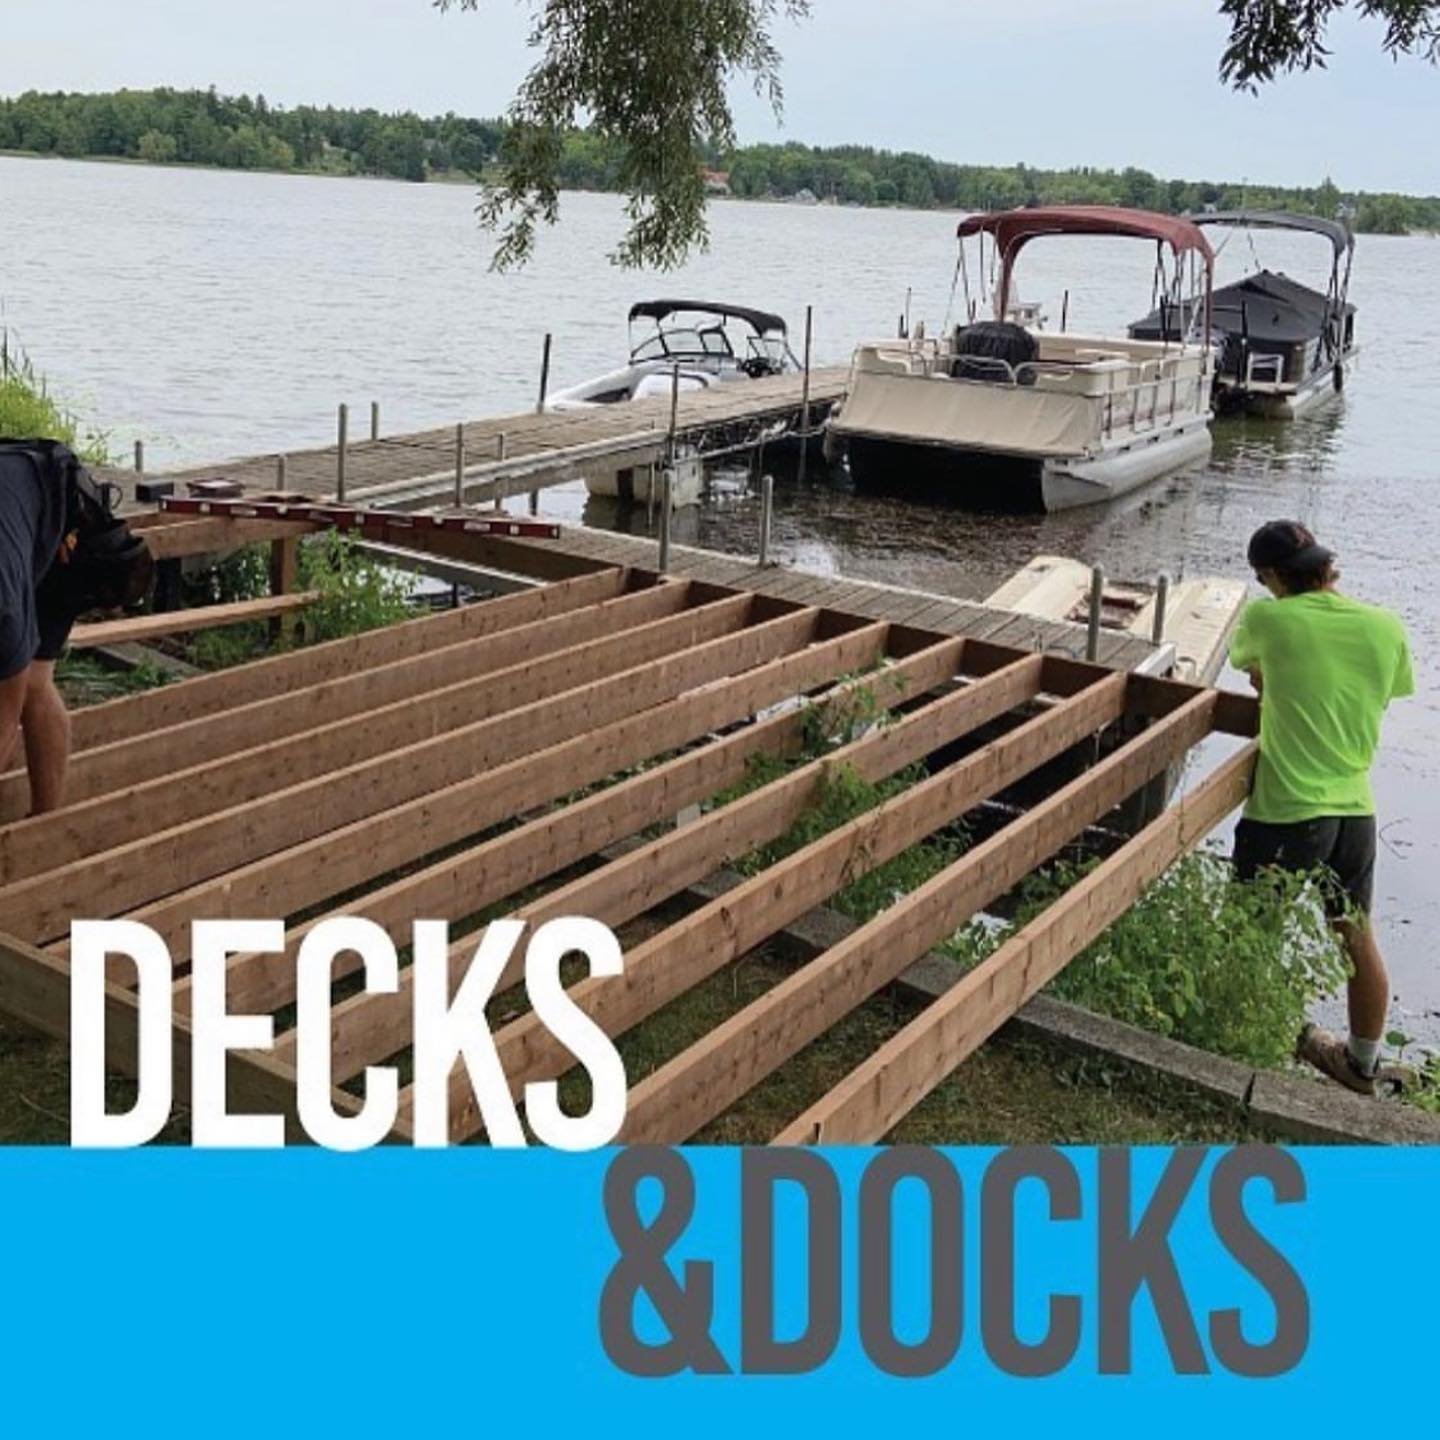 The deck and dock days of summer are truly here.☀️Our Red Seal Carpenter and the team create such beautiful outdoor decks, fences, porches, docks and more. 

We would love to know what&rsquo;s on your outside summer project list and what&rsquo;s your